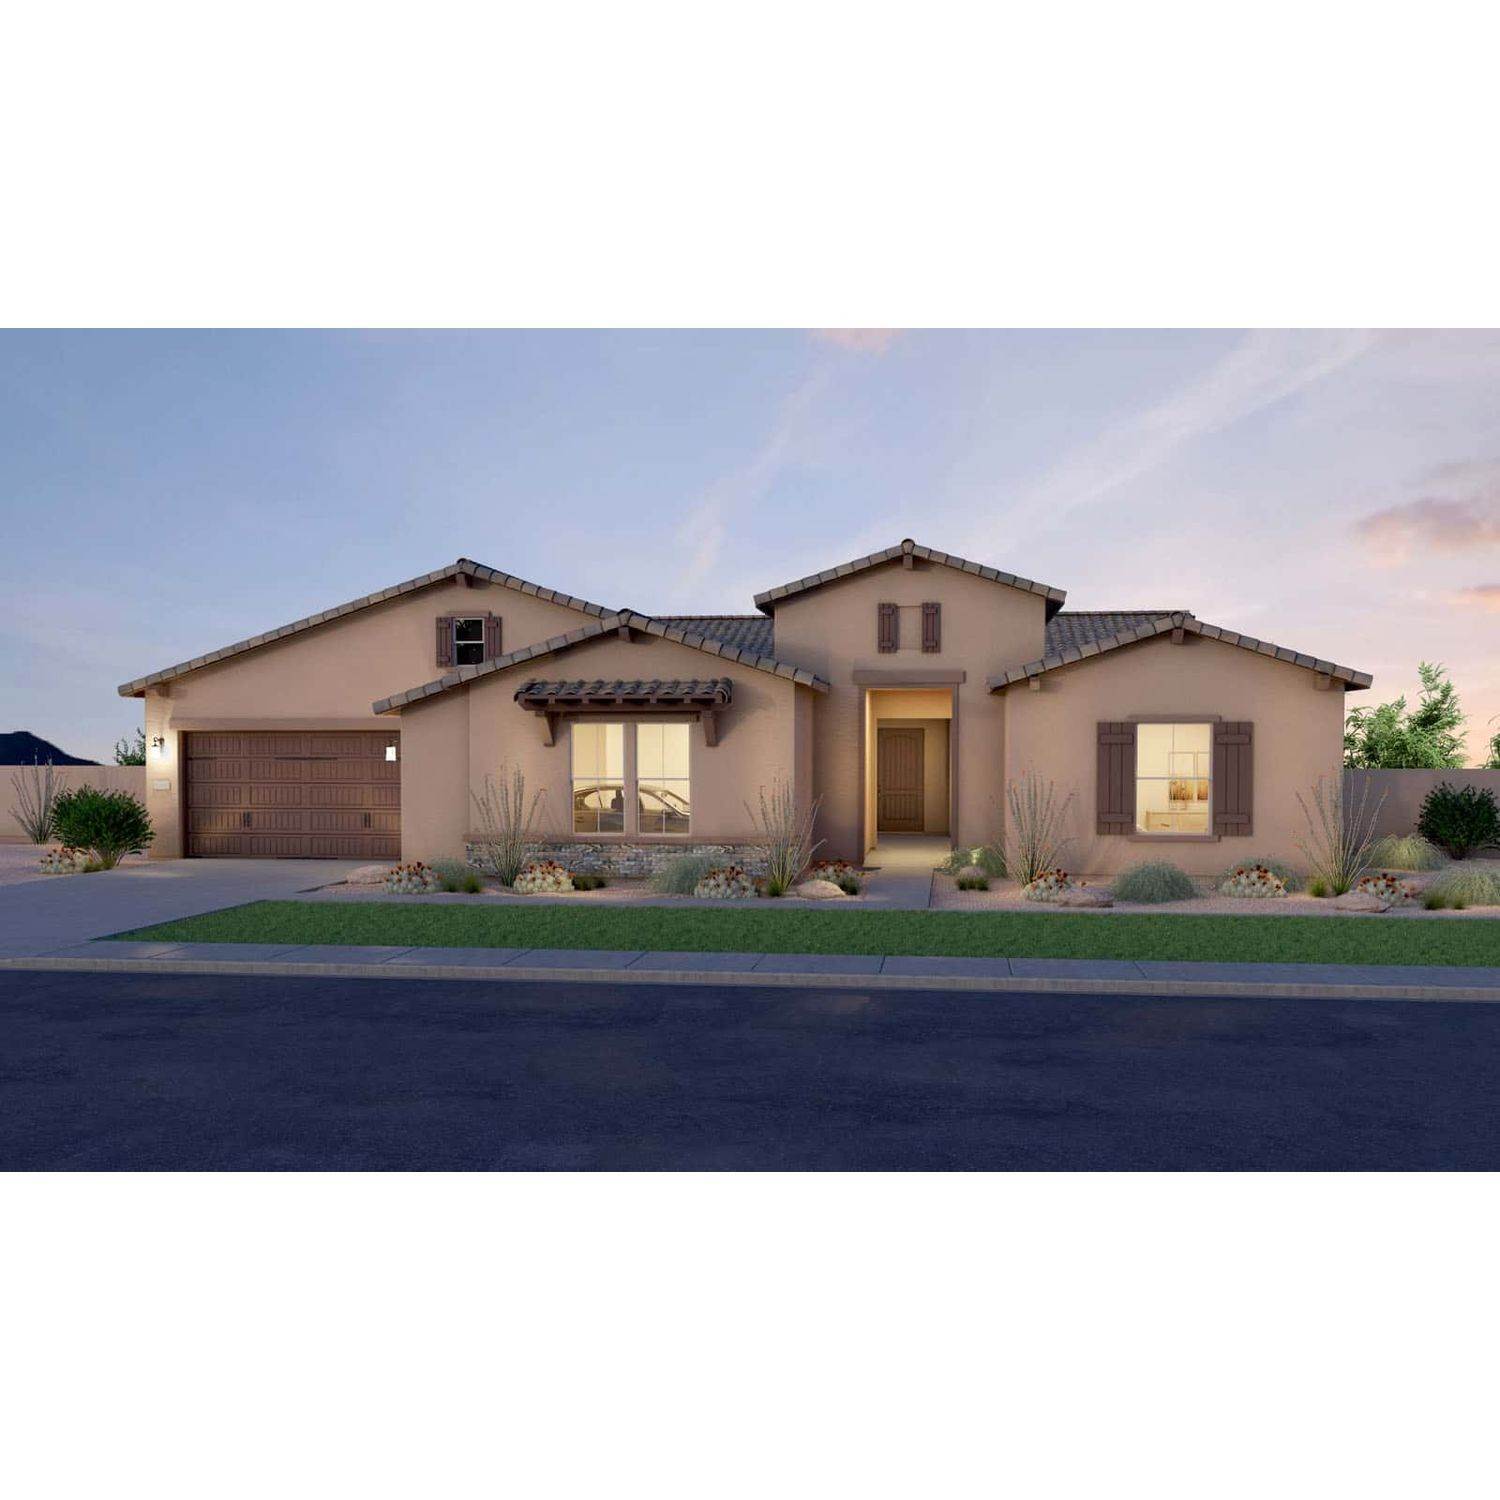 4. Single Family for Sale at Preserve At Sedella 18102 W Highland Ave., Goodyear, AZ 85395